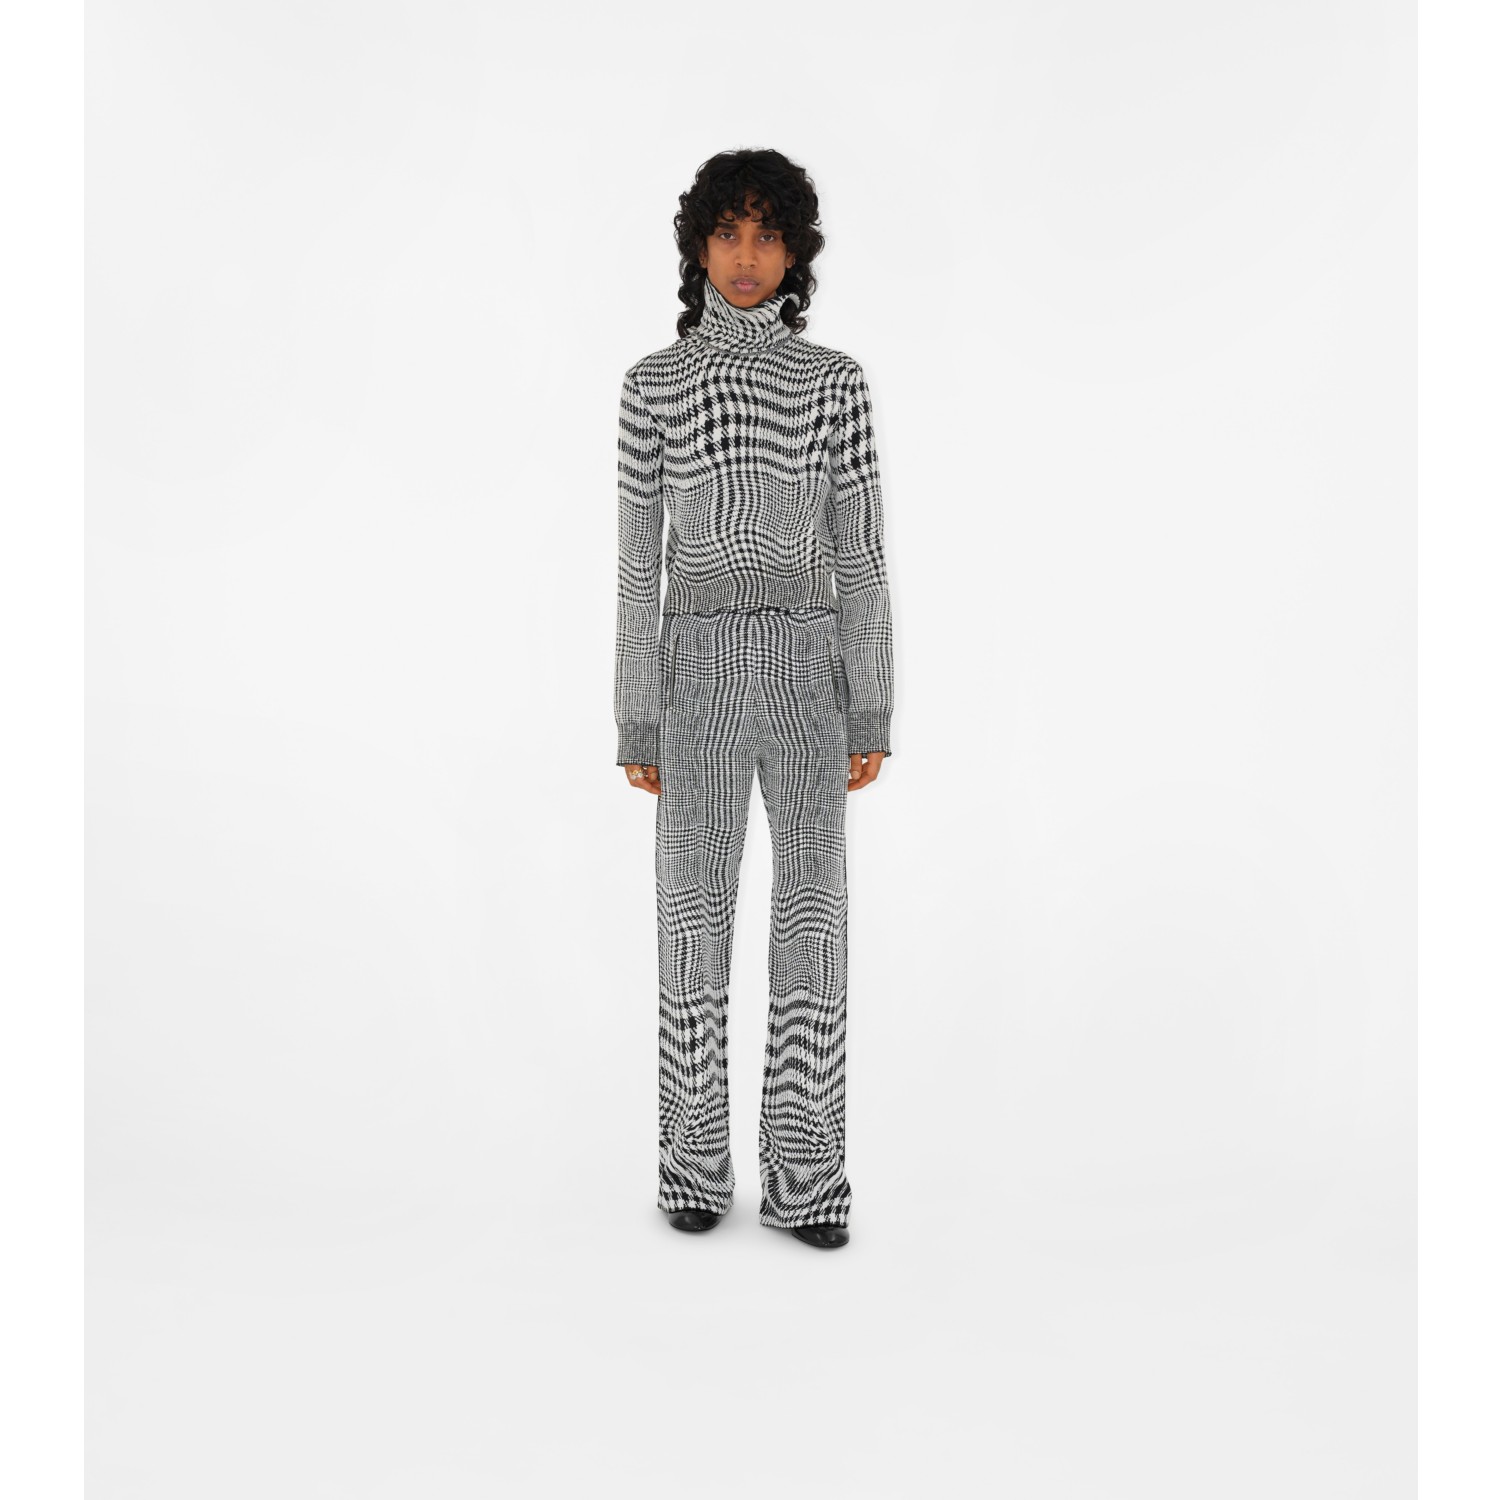 Warped Houndstooth Wool Blend Trousers